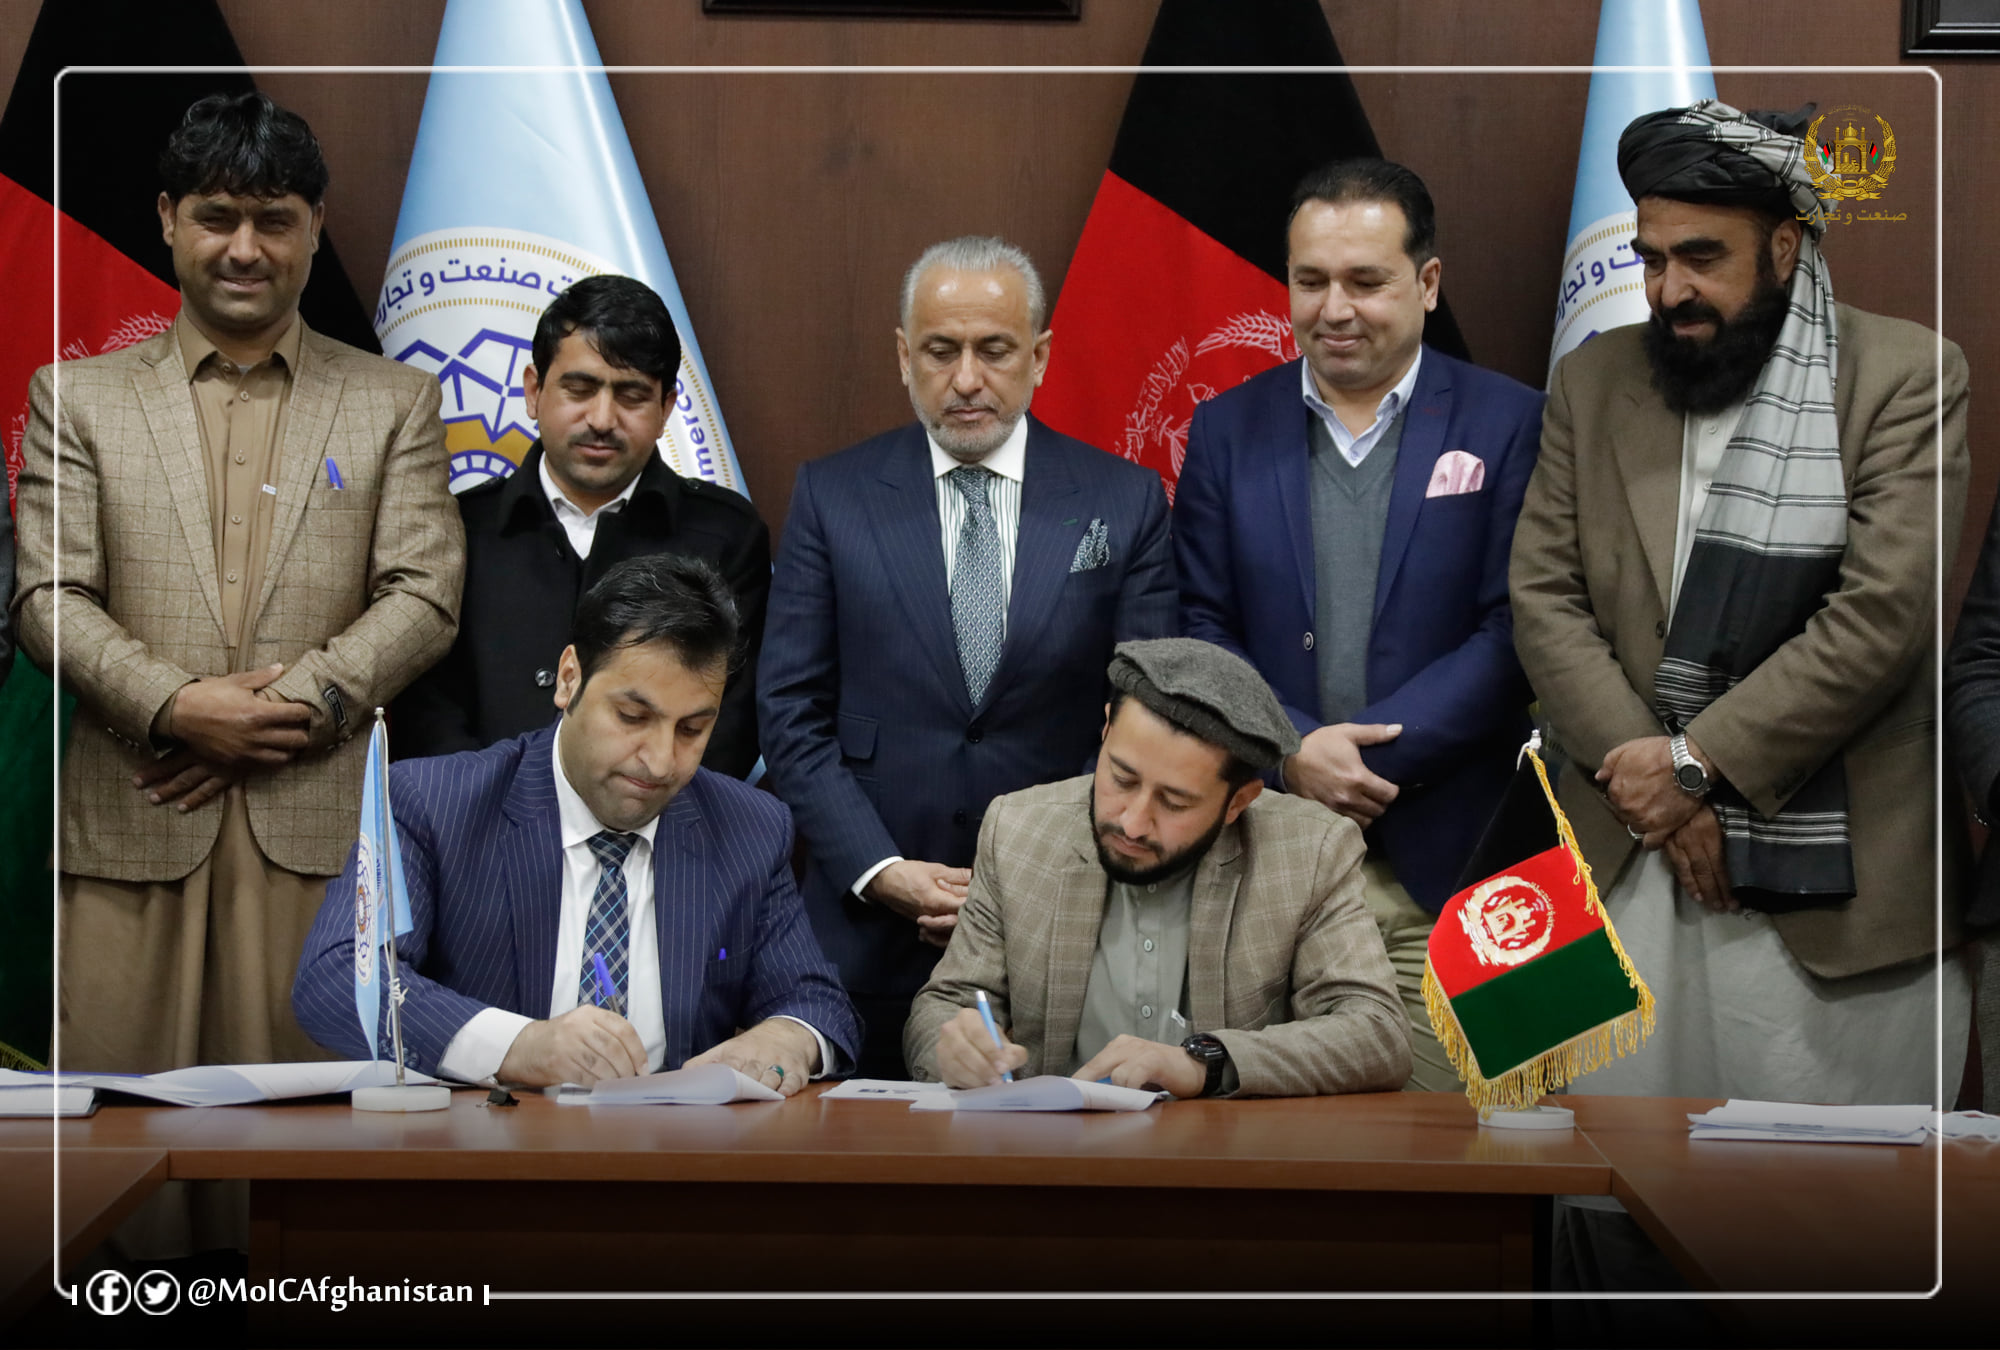 Signing a contract for the land sell to 27 industrial-production Factories